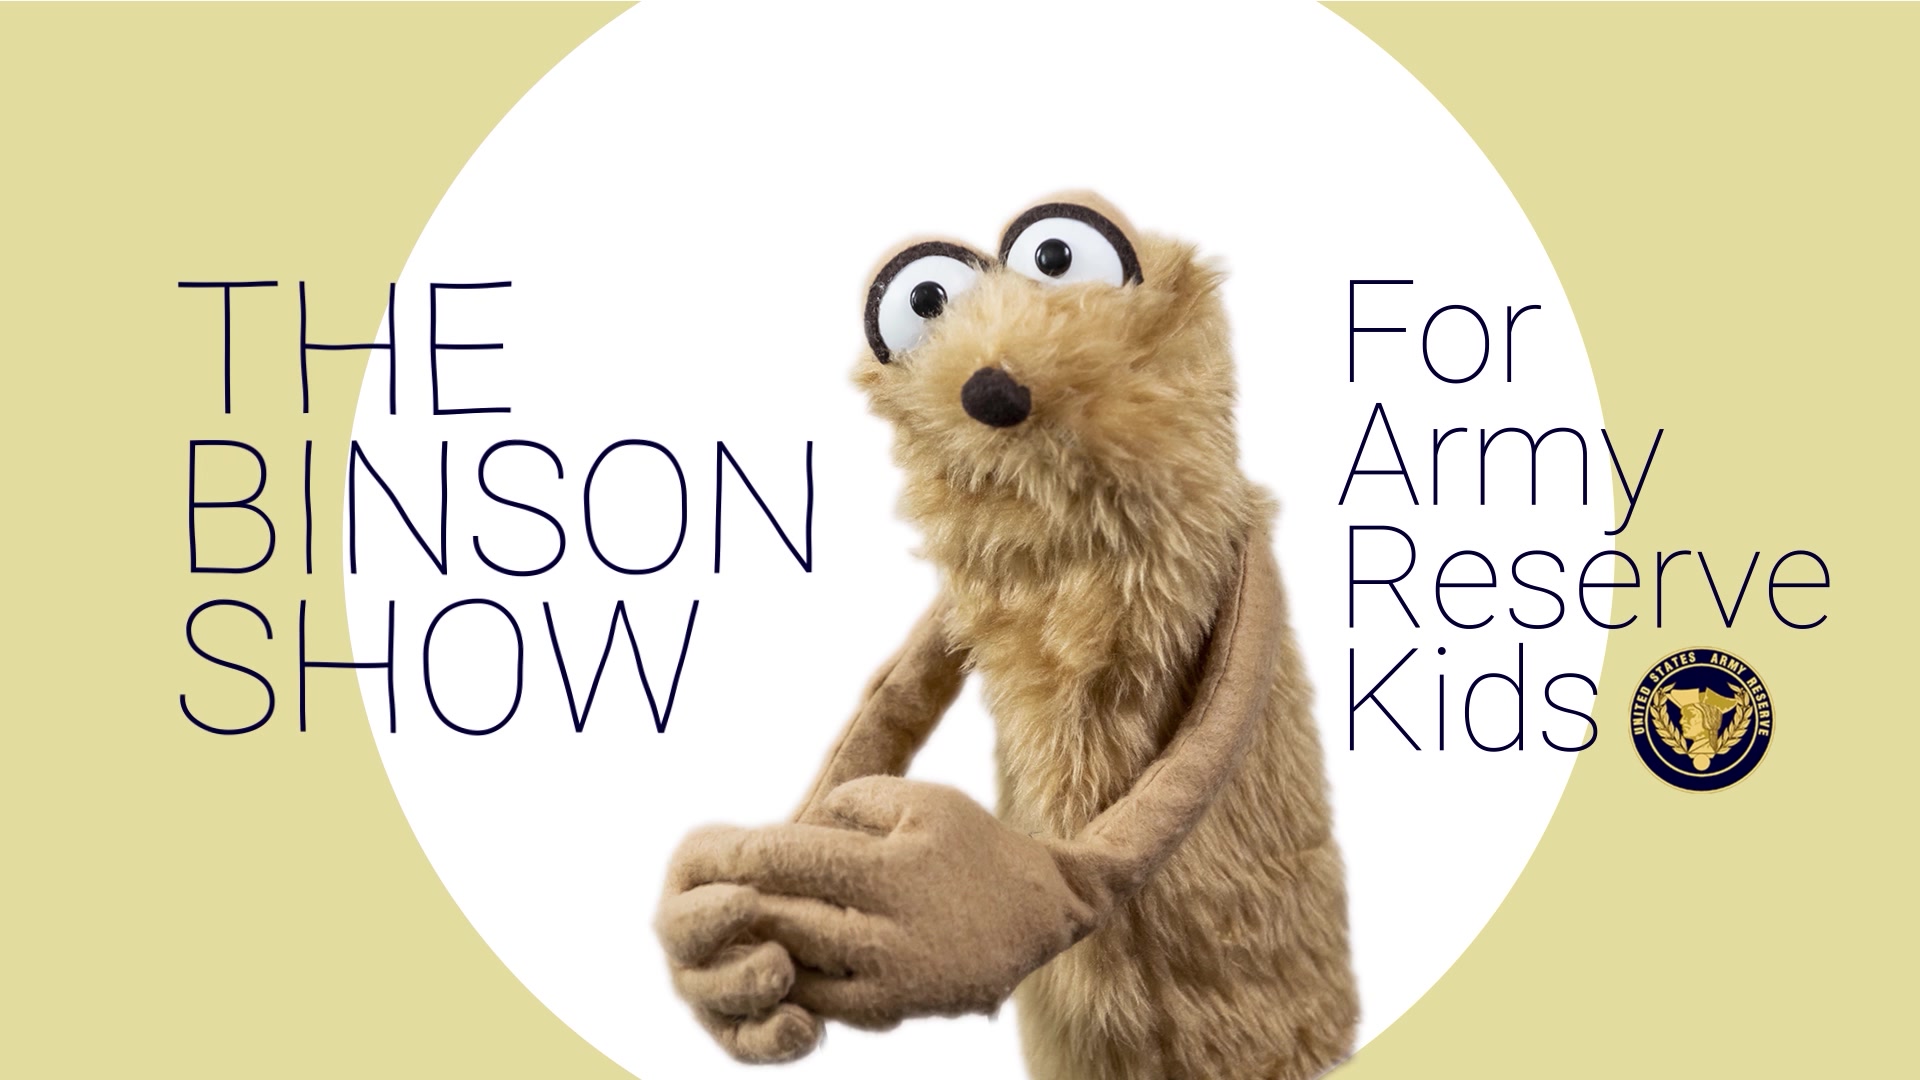 Binson is an energetic and lovable character who teaches children important lessons about COVID-19 and other issues through his playful exploration. Through such play he finds the reasons for the guidelines that Army Reserve Families should follow. These short shows are intended for children of all ages.

In this first Episode, Binson attempts to figure out what Social Distancing is, and why it's an important guideline for children to follow. 

This show is written, produced and edited by SFC Jerimiah Richardson 
Binson and other characters are operated by MSG Michael Chann
Video shot by MSG Michel Sauret